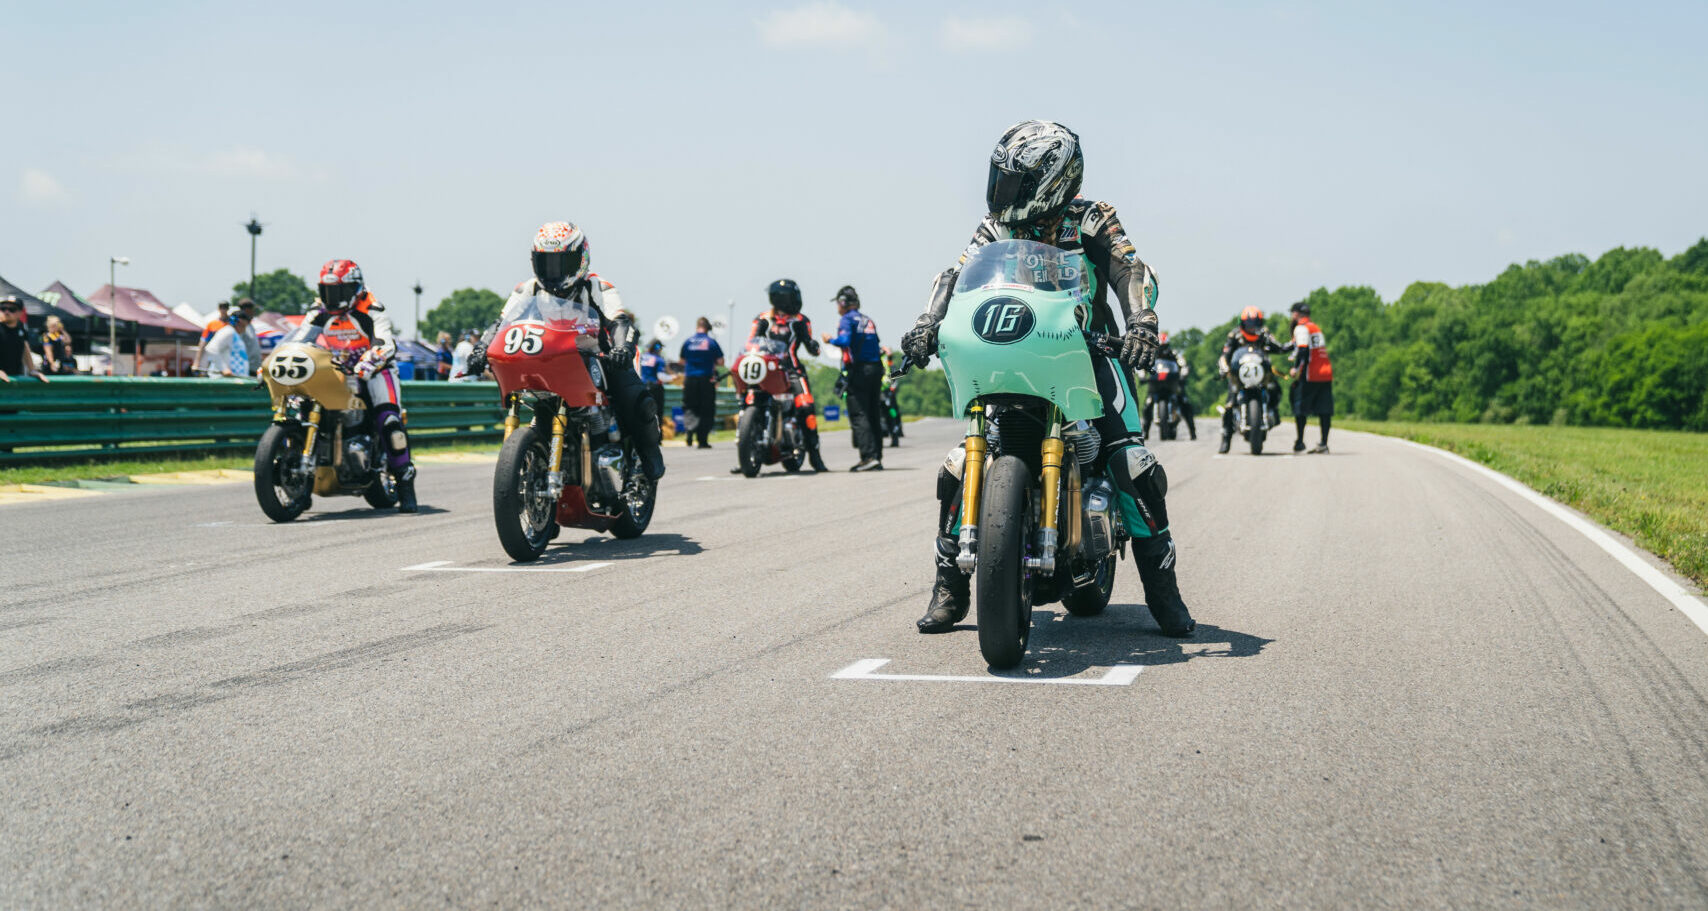 The Royal Enfield BUILD. TRAIN. RACE. road race grid at VIR in 2022. Photo courtesy Royal Enfield North America.